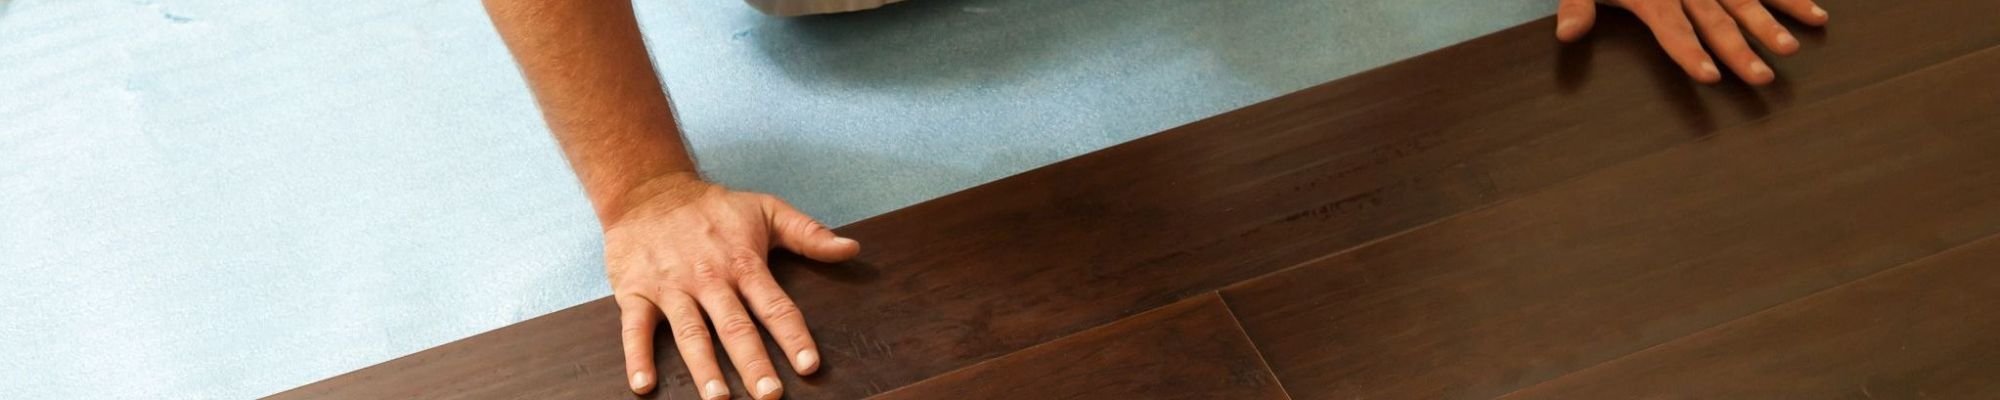 hardwood floor installation services from Potomac Tile and Carpet in Frederick, MD